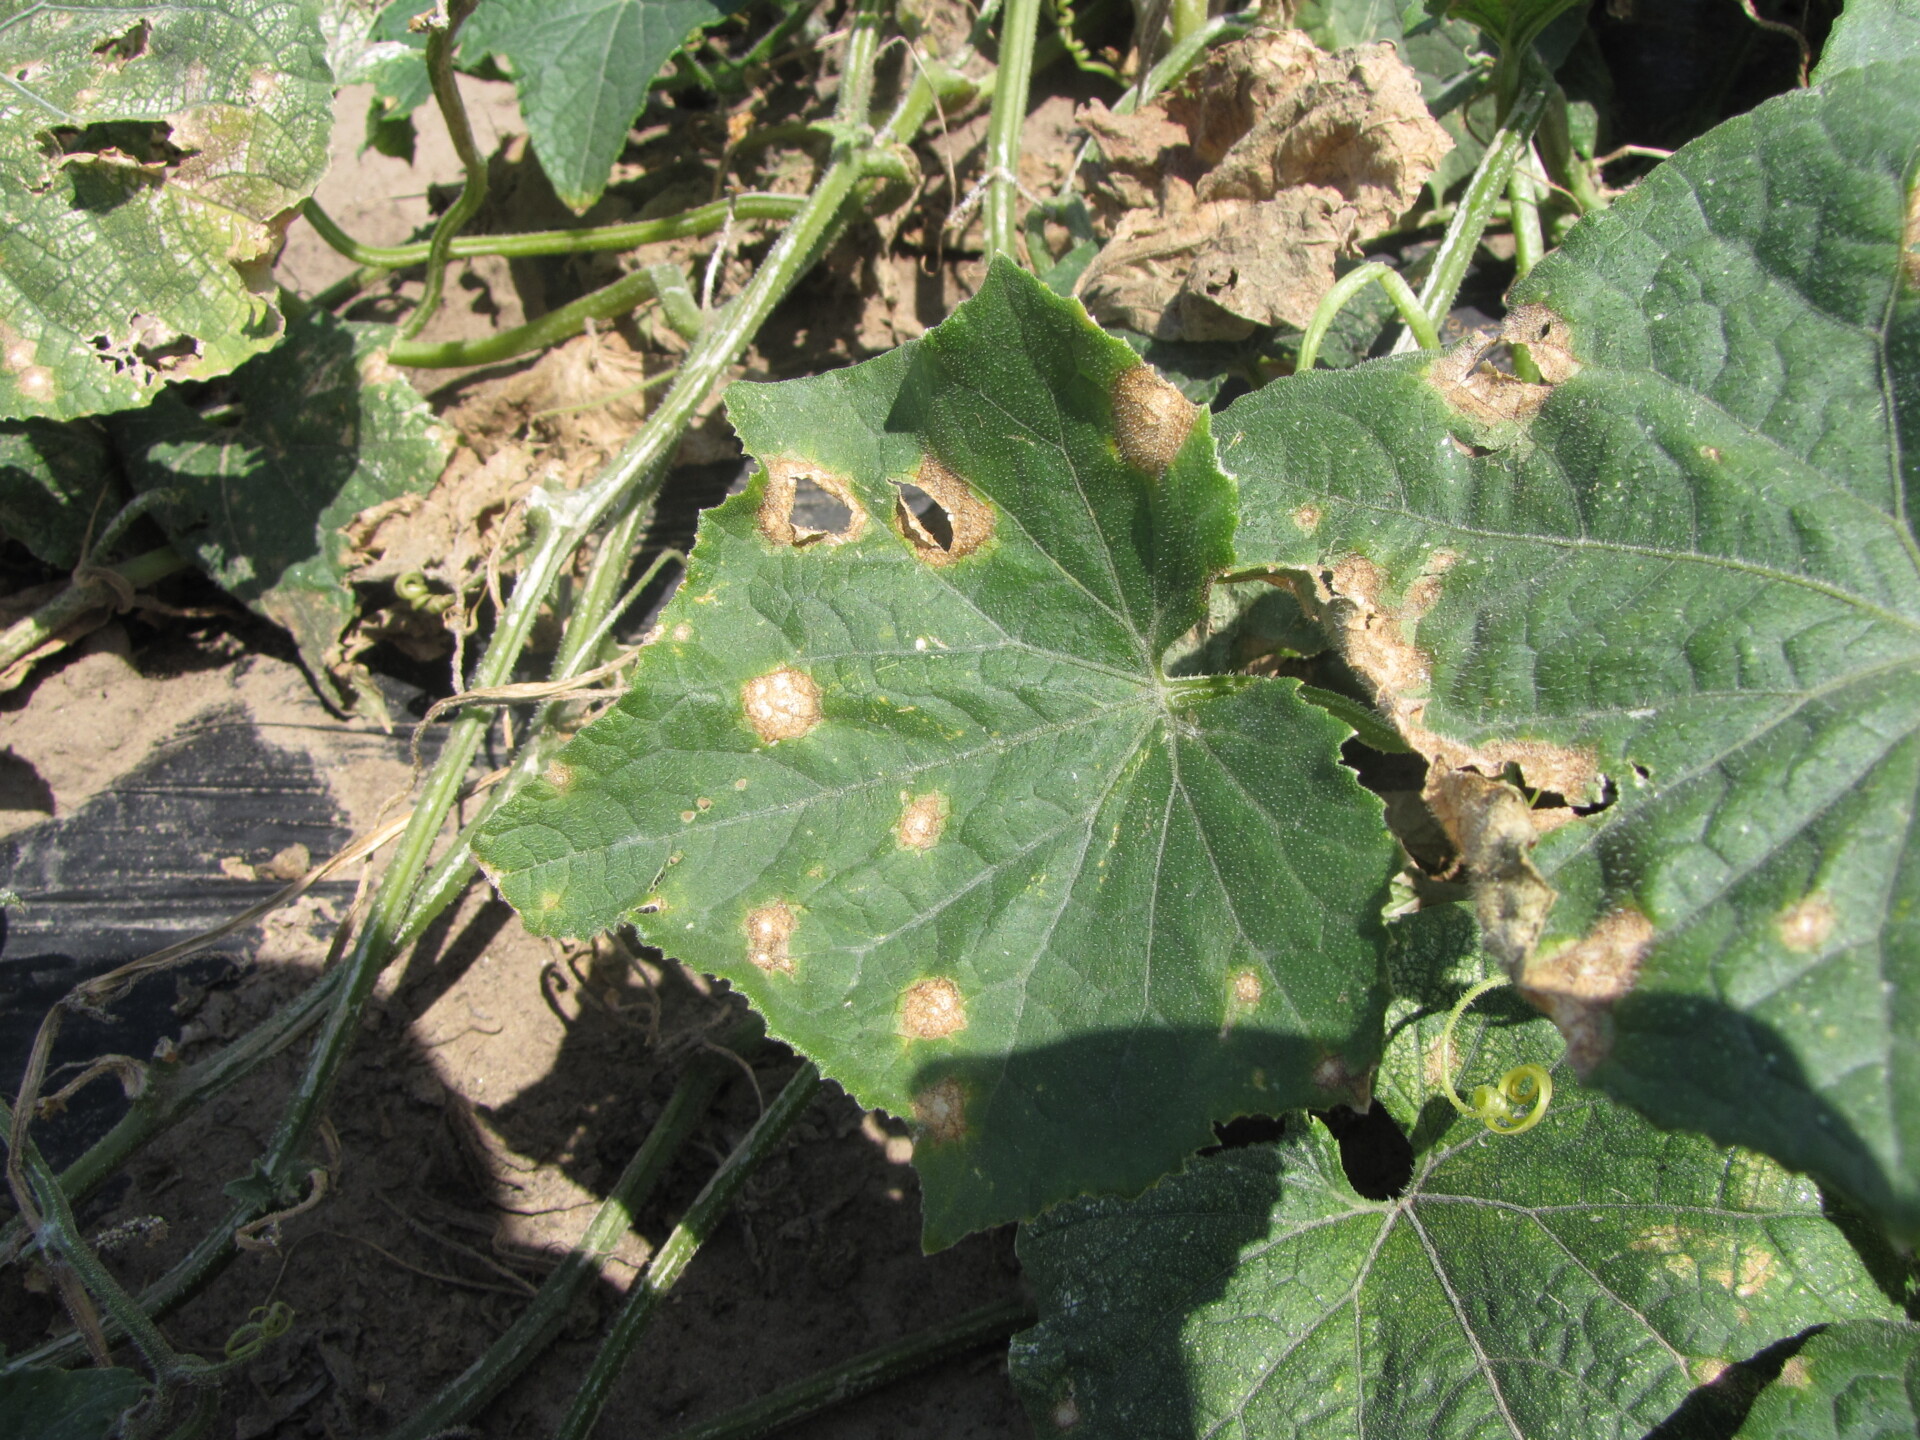 Figure 2. Anthracnose lesions on cucumber leaves.